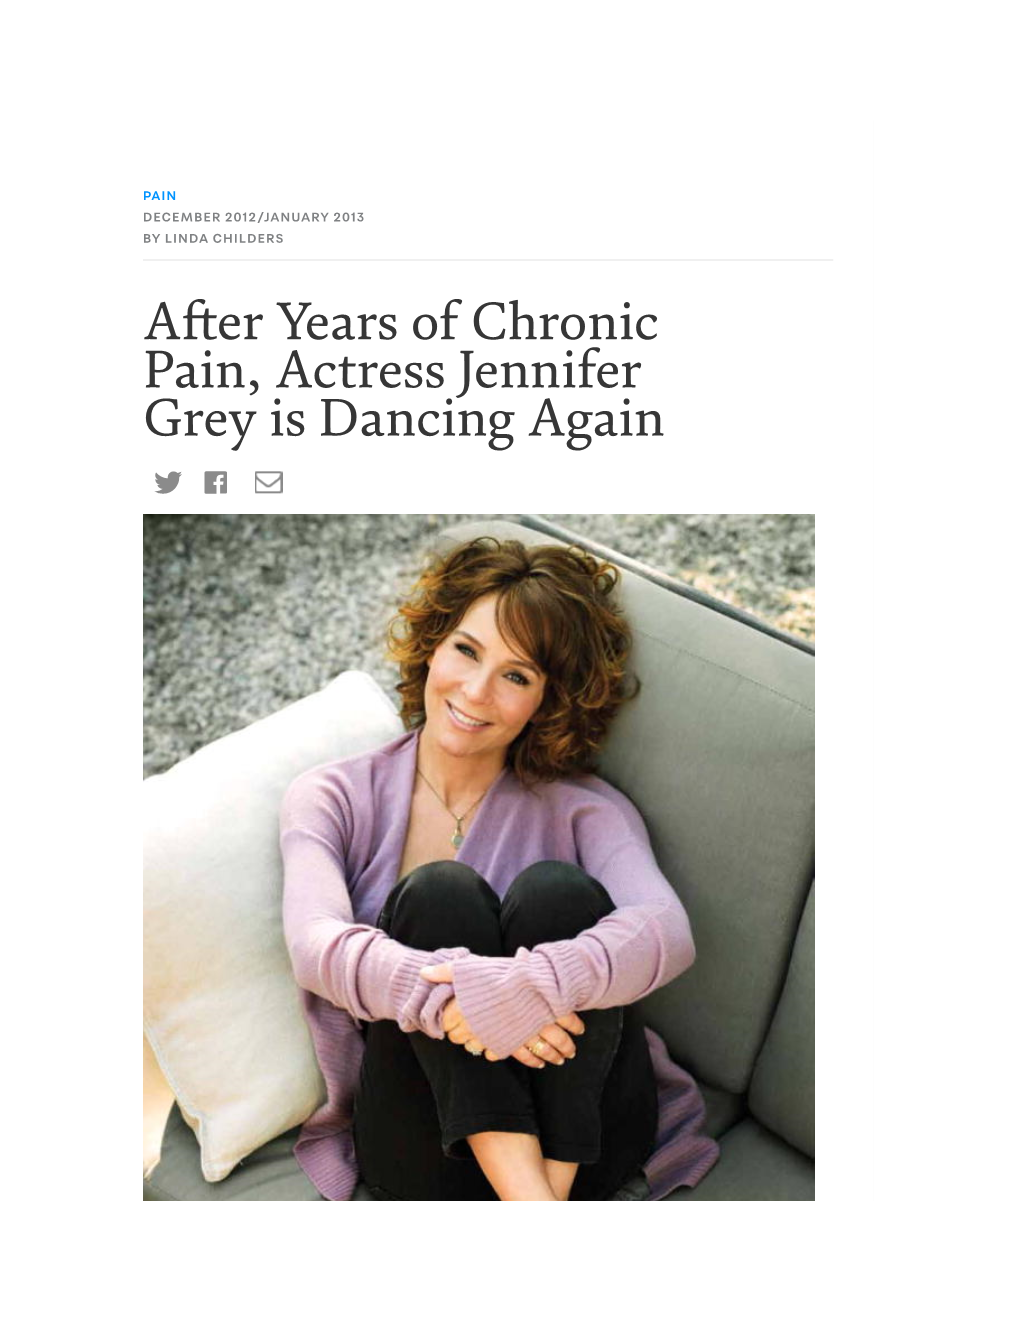 A Er Years of Chronic Pain, Actress Jennifer Grey Is Dancing Again